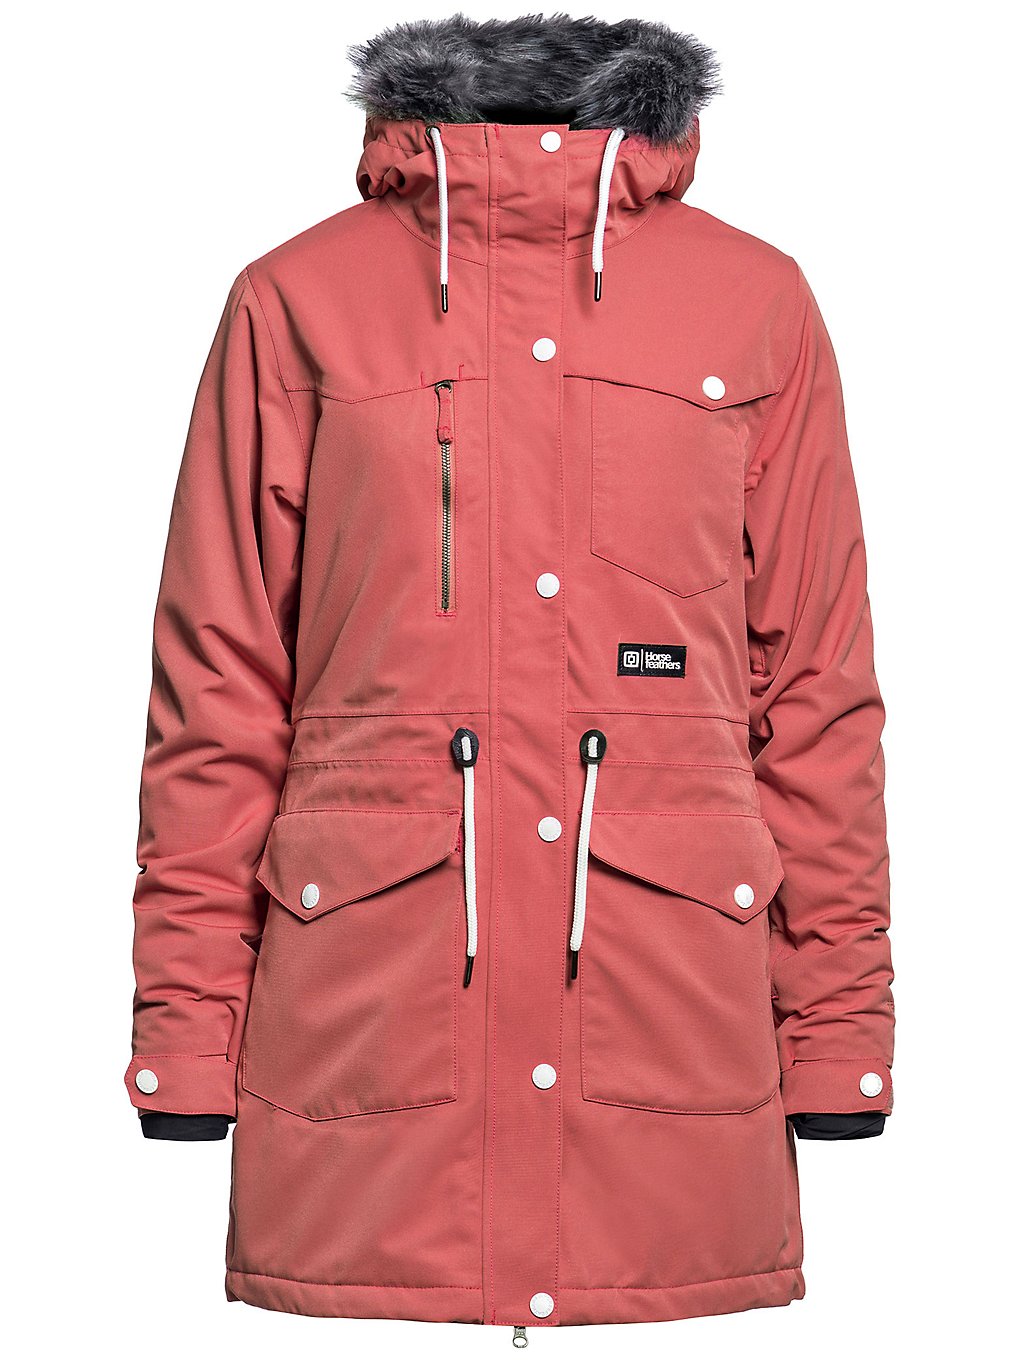 Horsefeathers Luann Jacket spiced coral